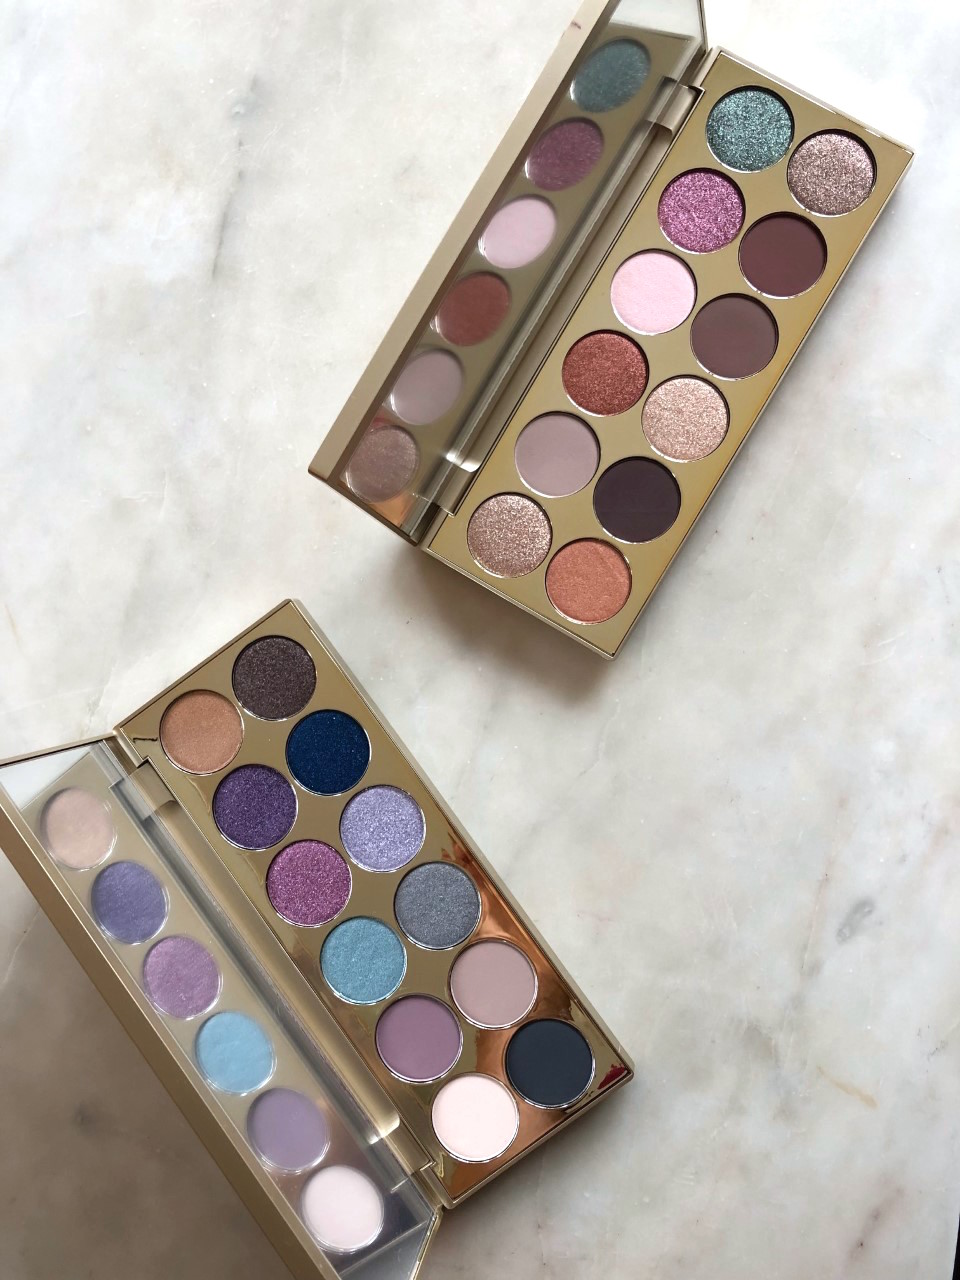 Stila After Hours Eyeshadow Palette: A quick review